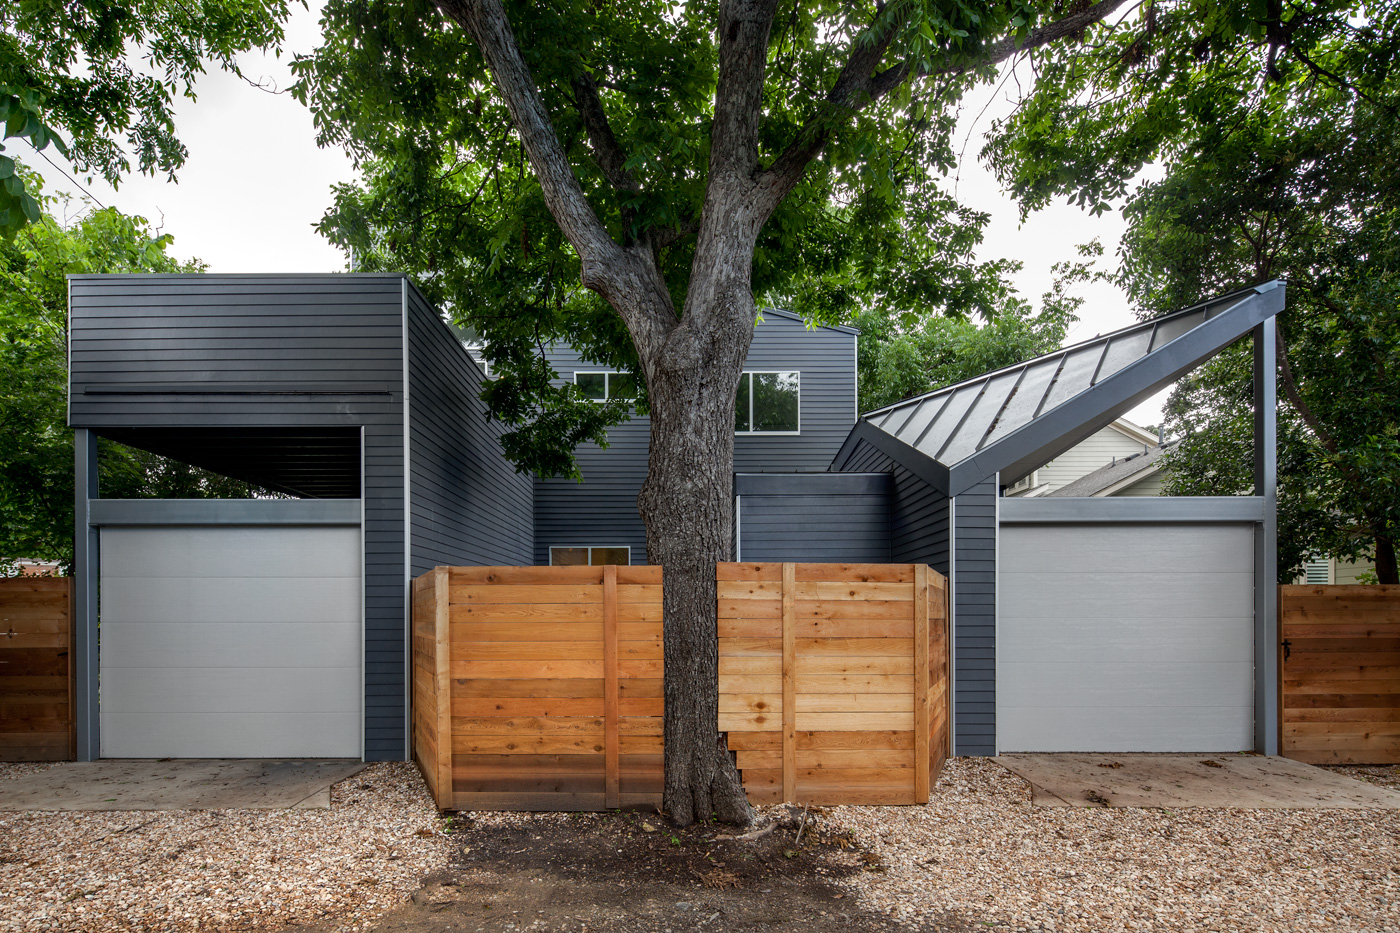 Two garages split evenly by a fence and a tree.